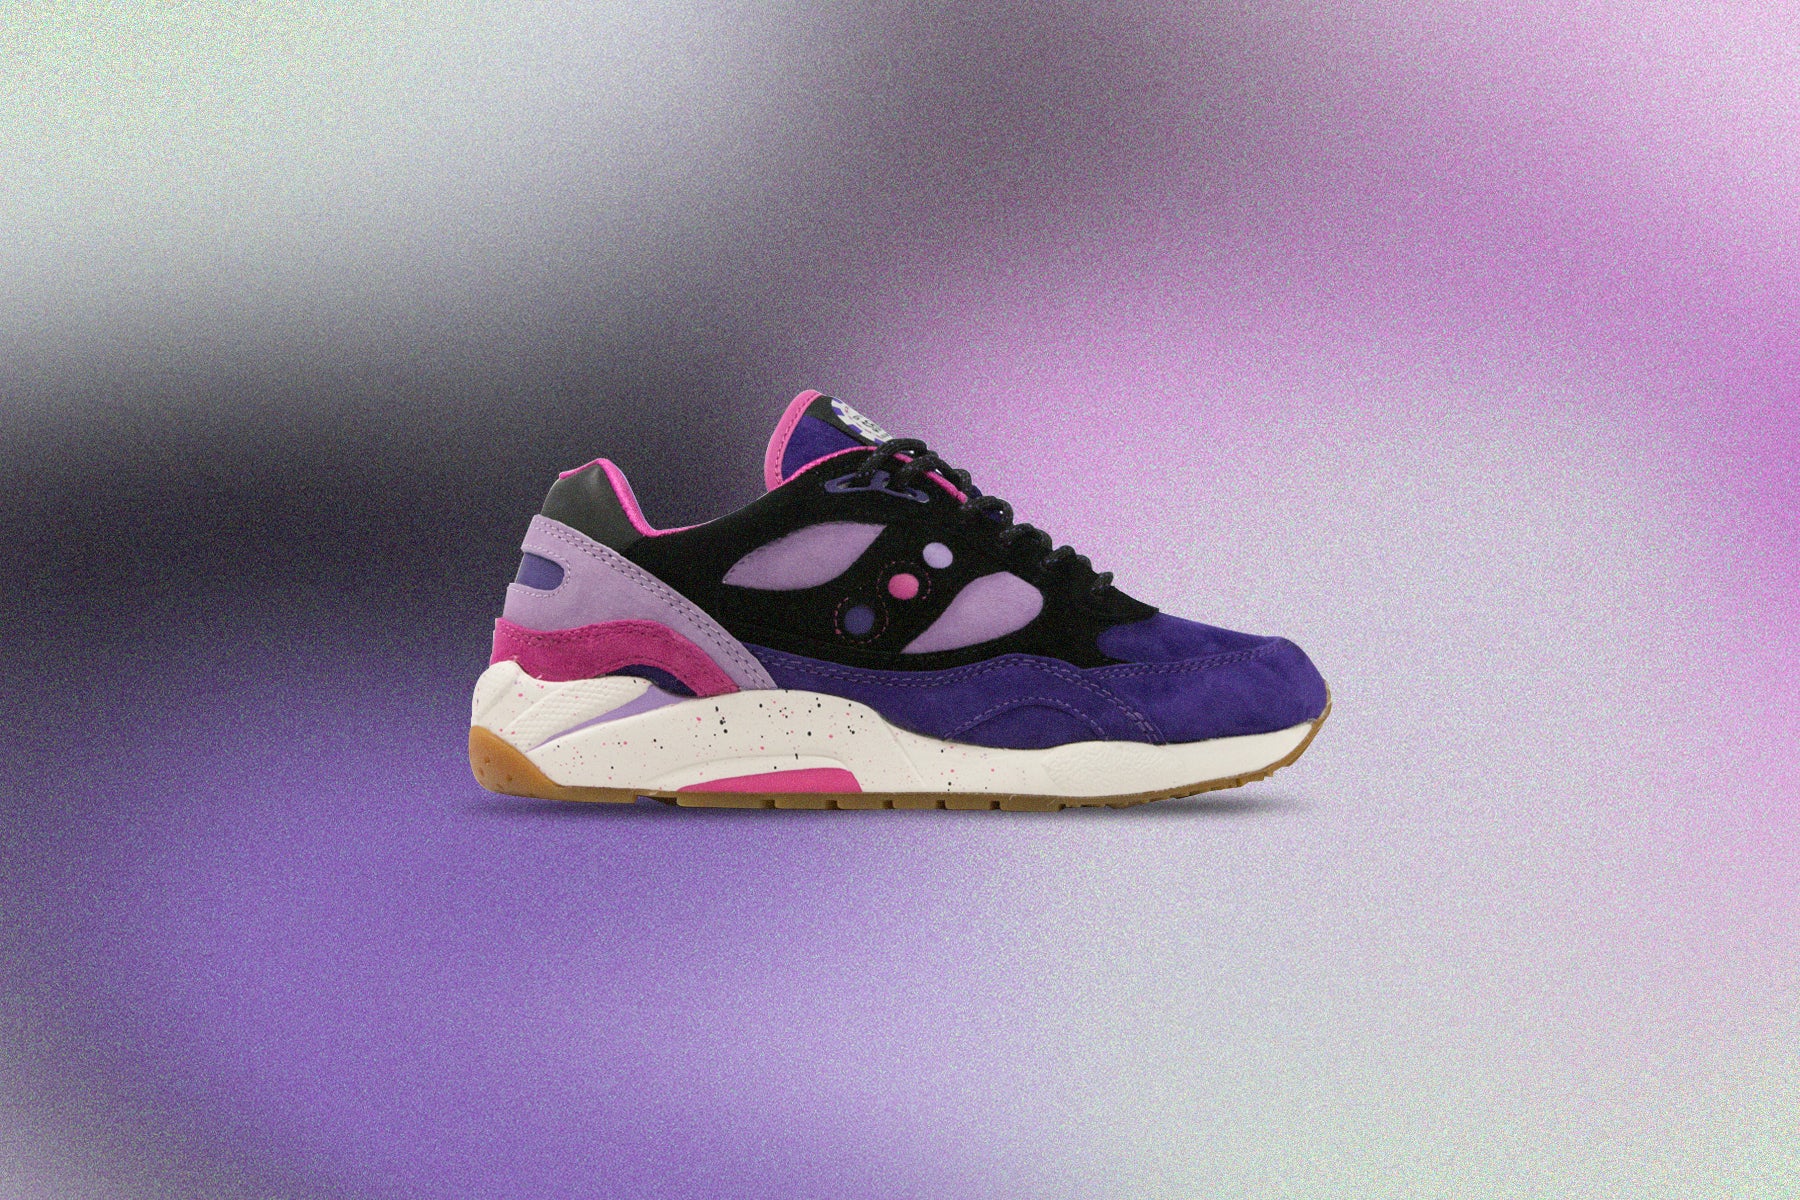 FEATURE x Saucony: The History of the High Roller Pack – Feature